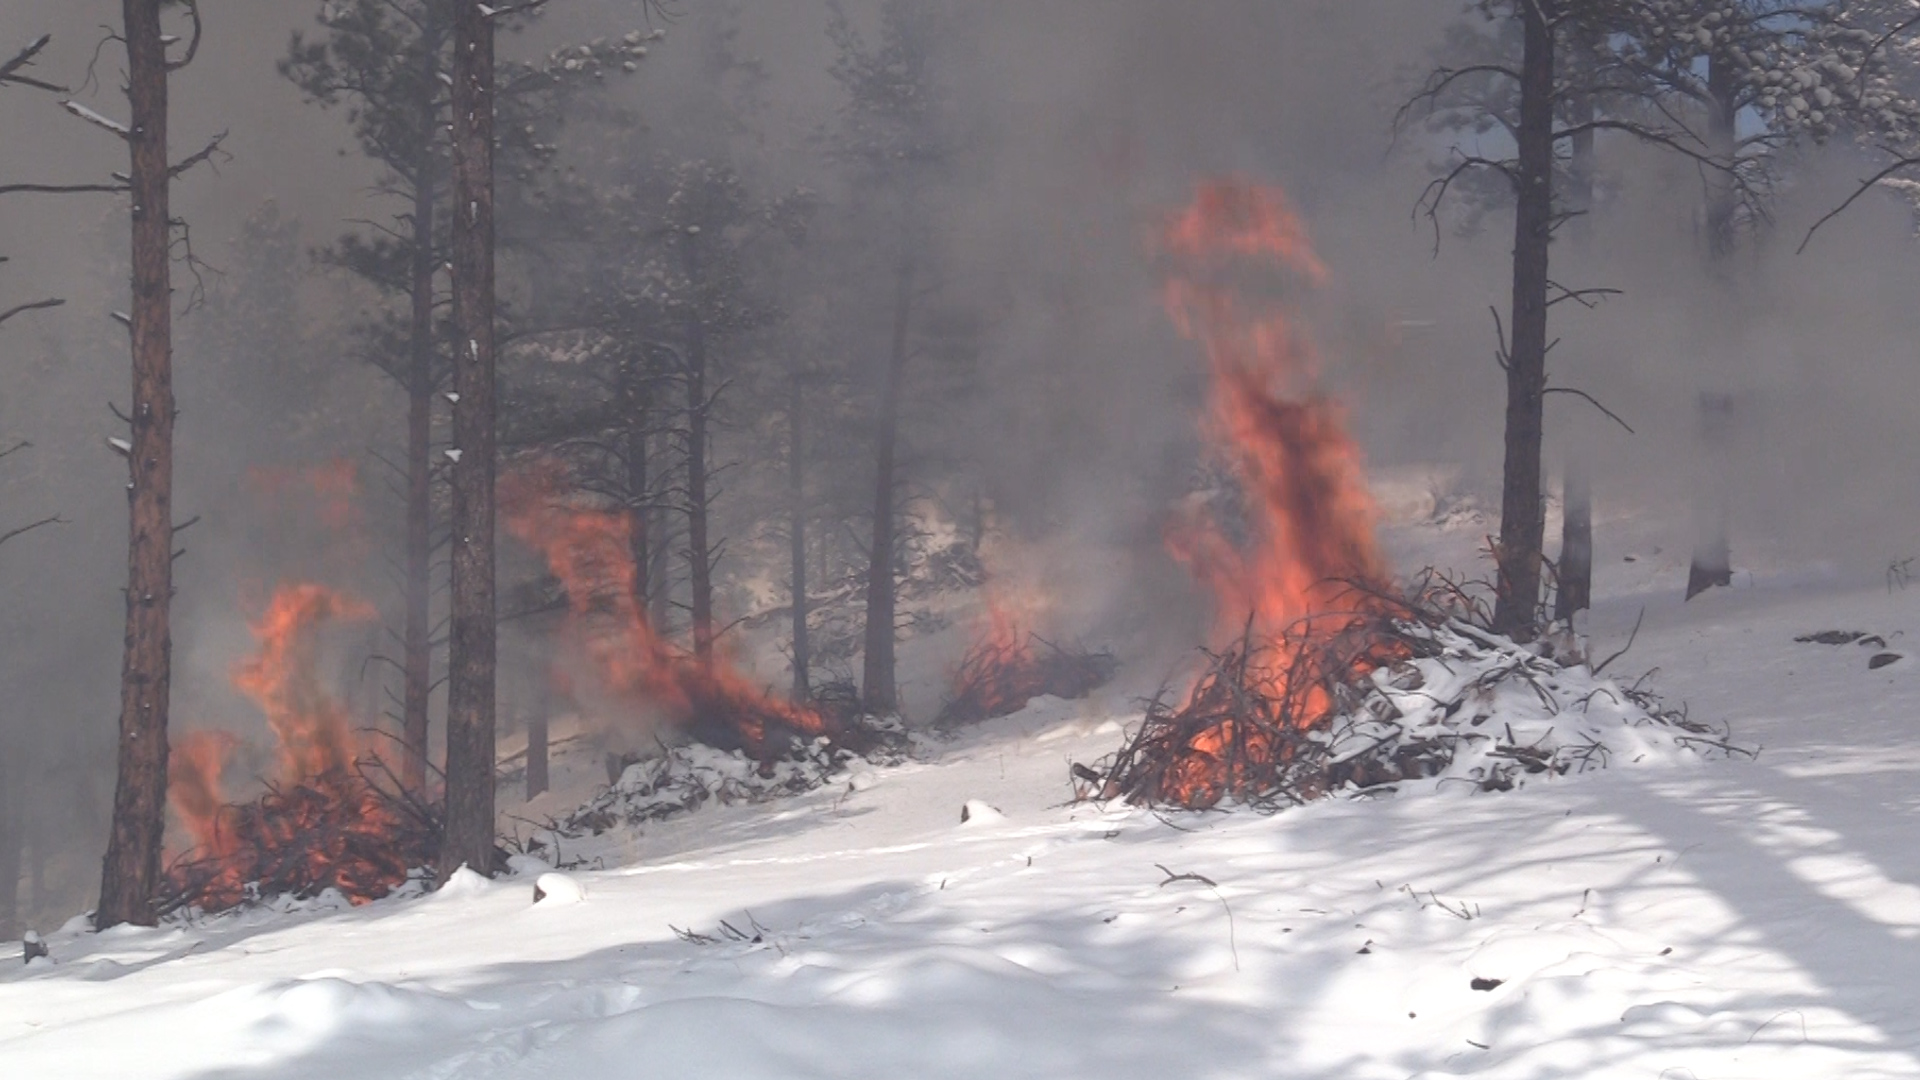 Corps members set 500 slash piles on fire in February.